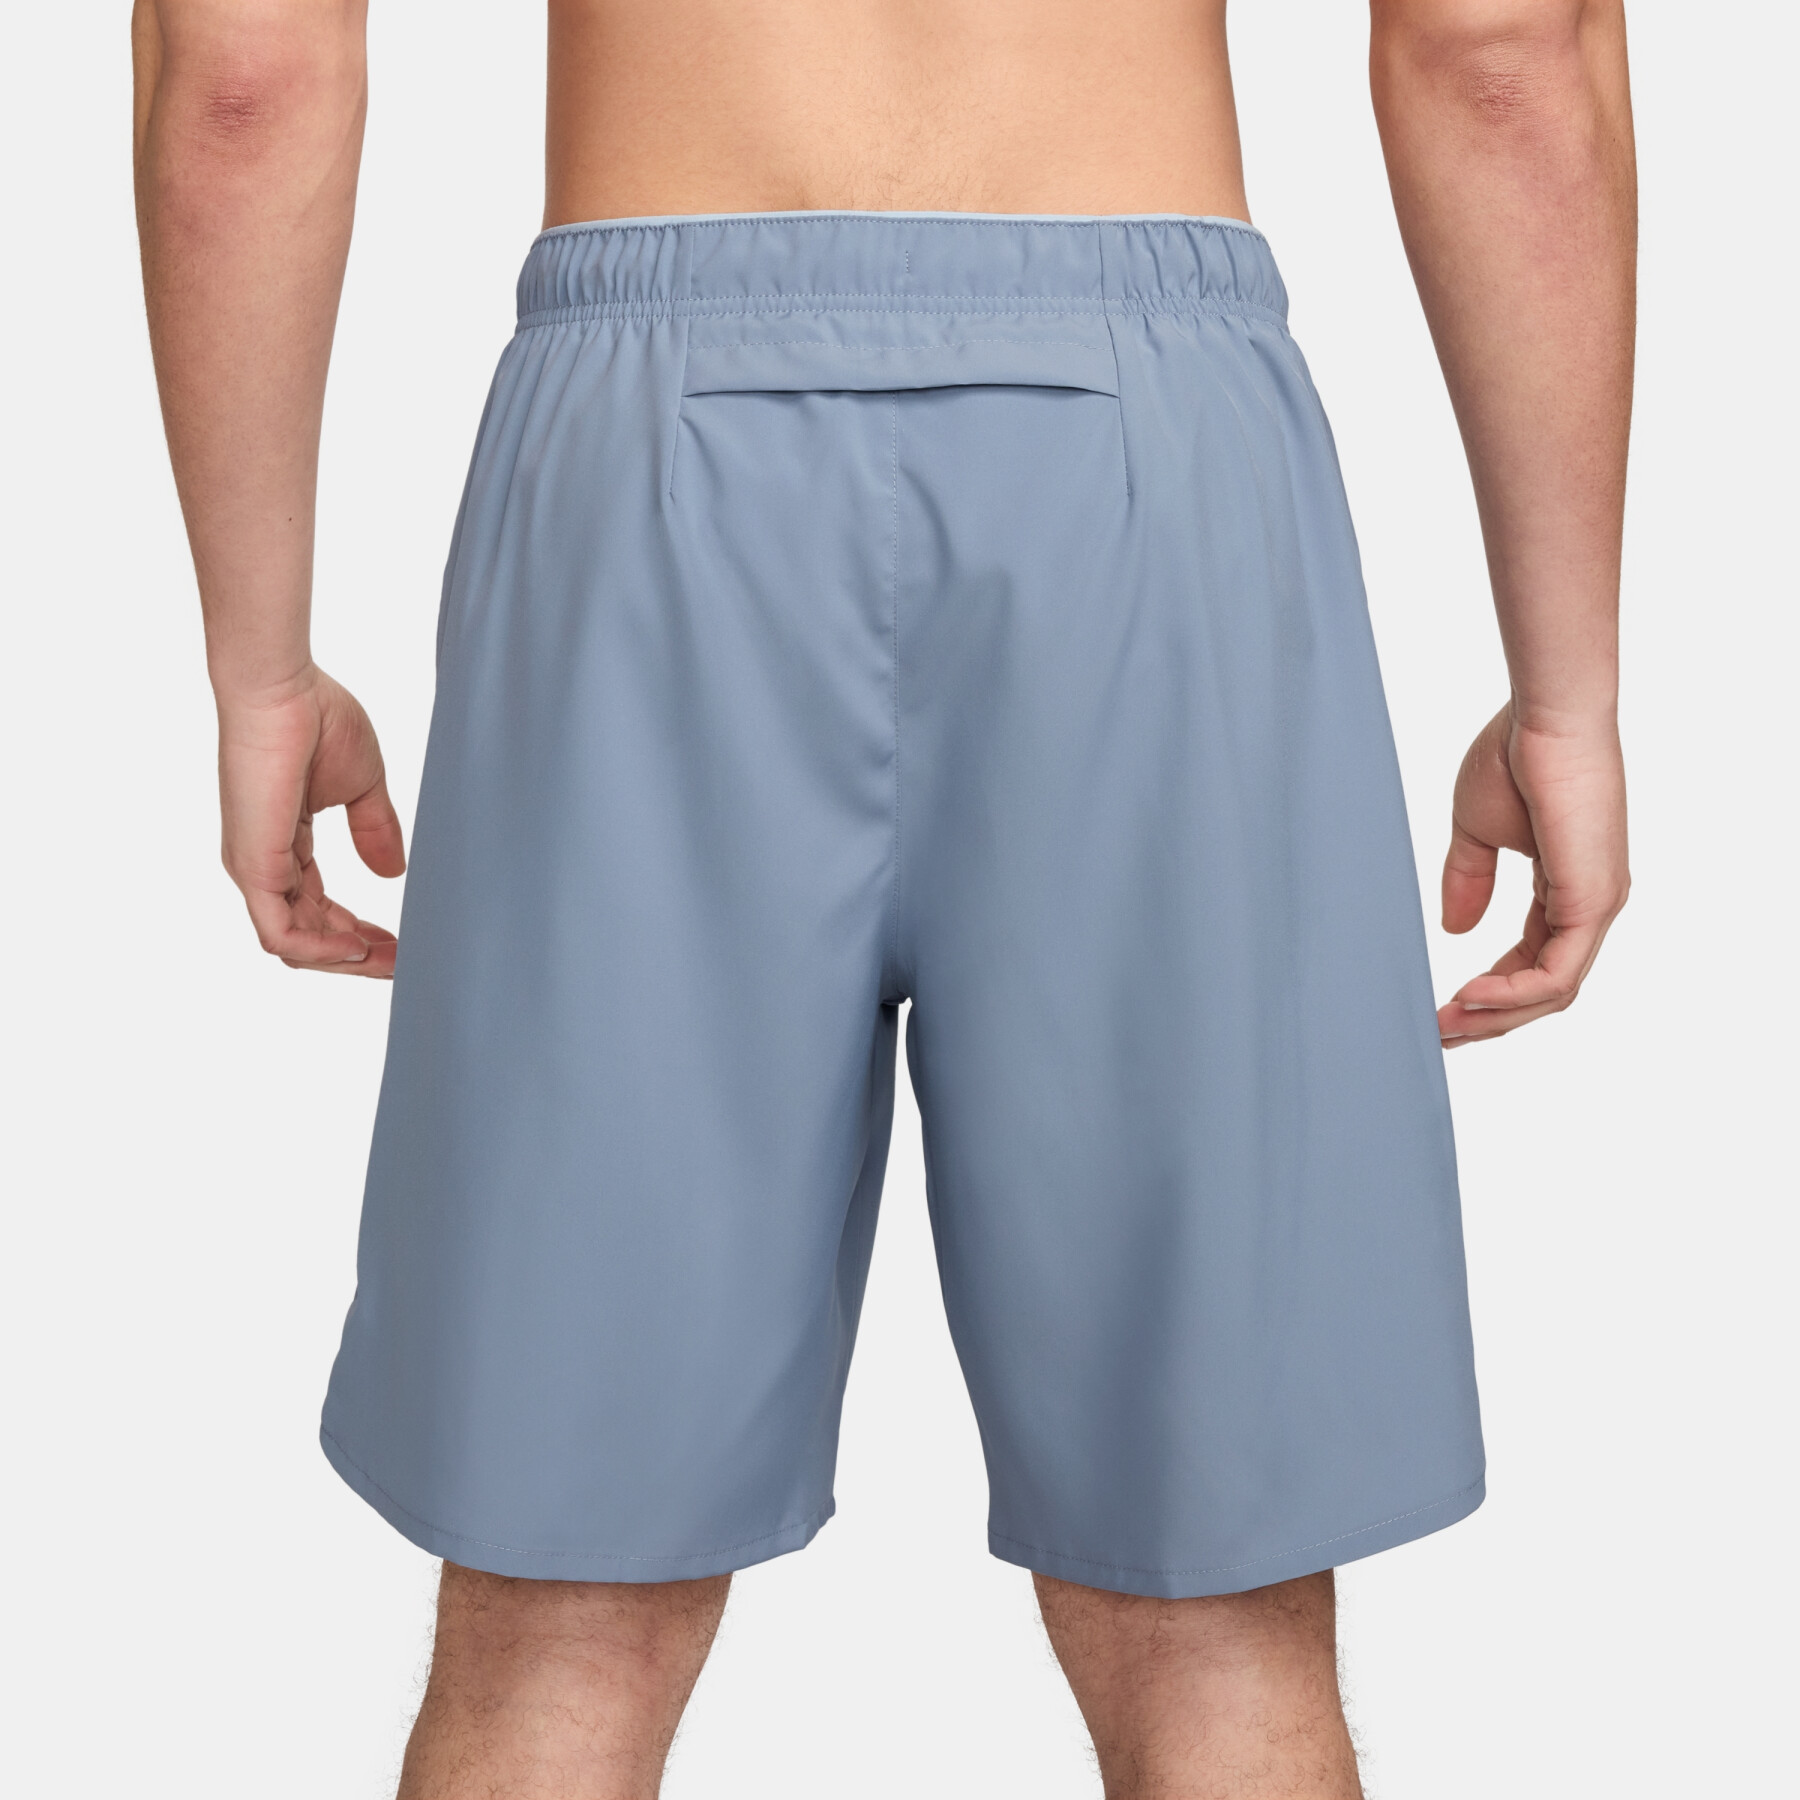 Shorts with integrated undershorts Nike Challenger Dri-FIT